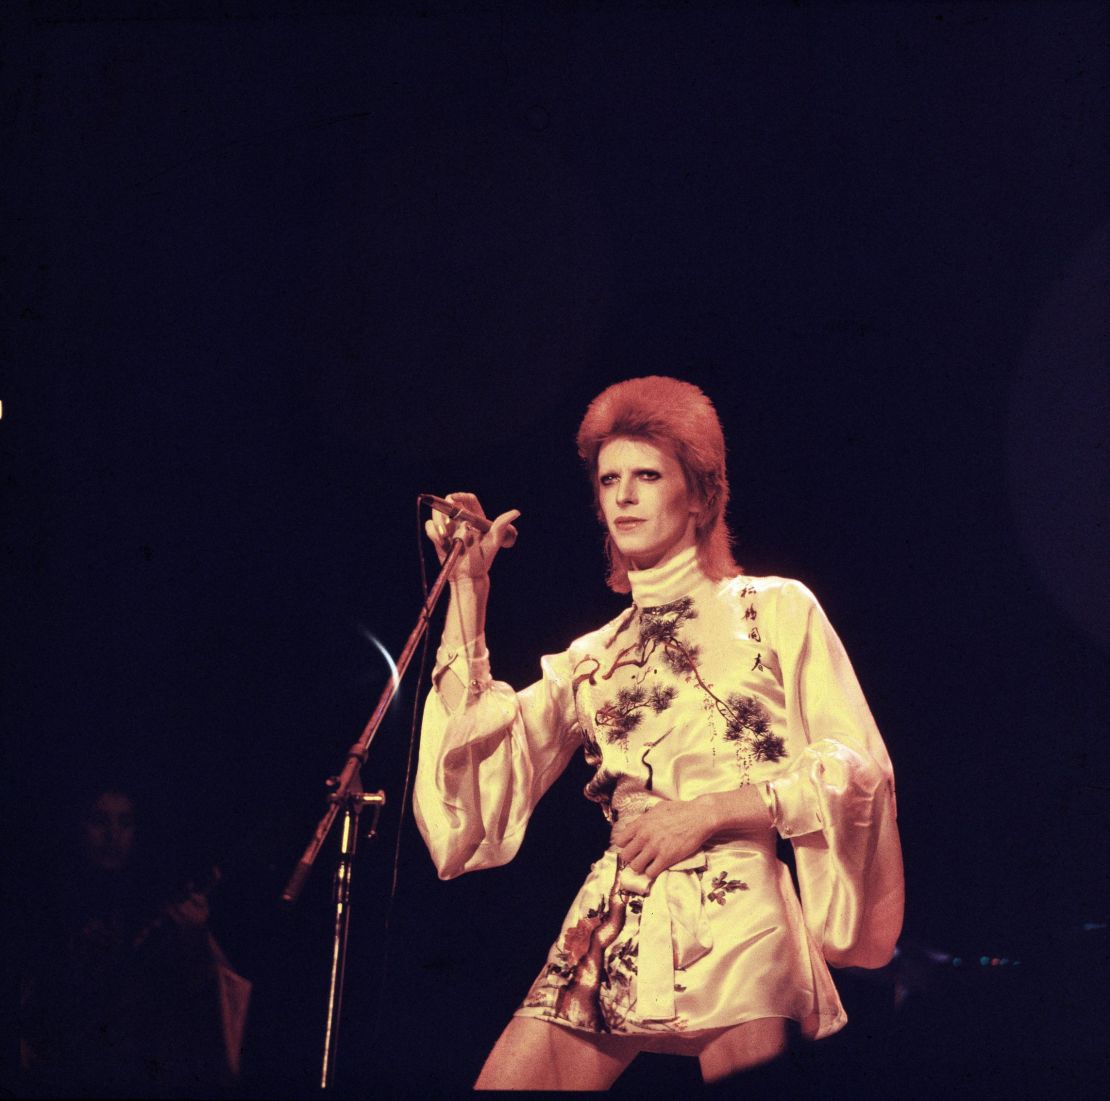 David Bowie (1947 - 2016) performs on stage on his Ziggy Stardust/Aladdin Sane tour in London, 1973.